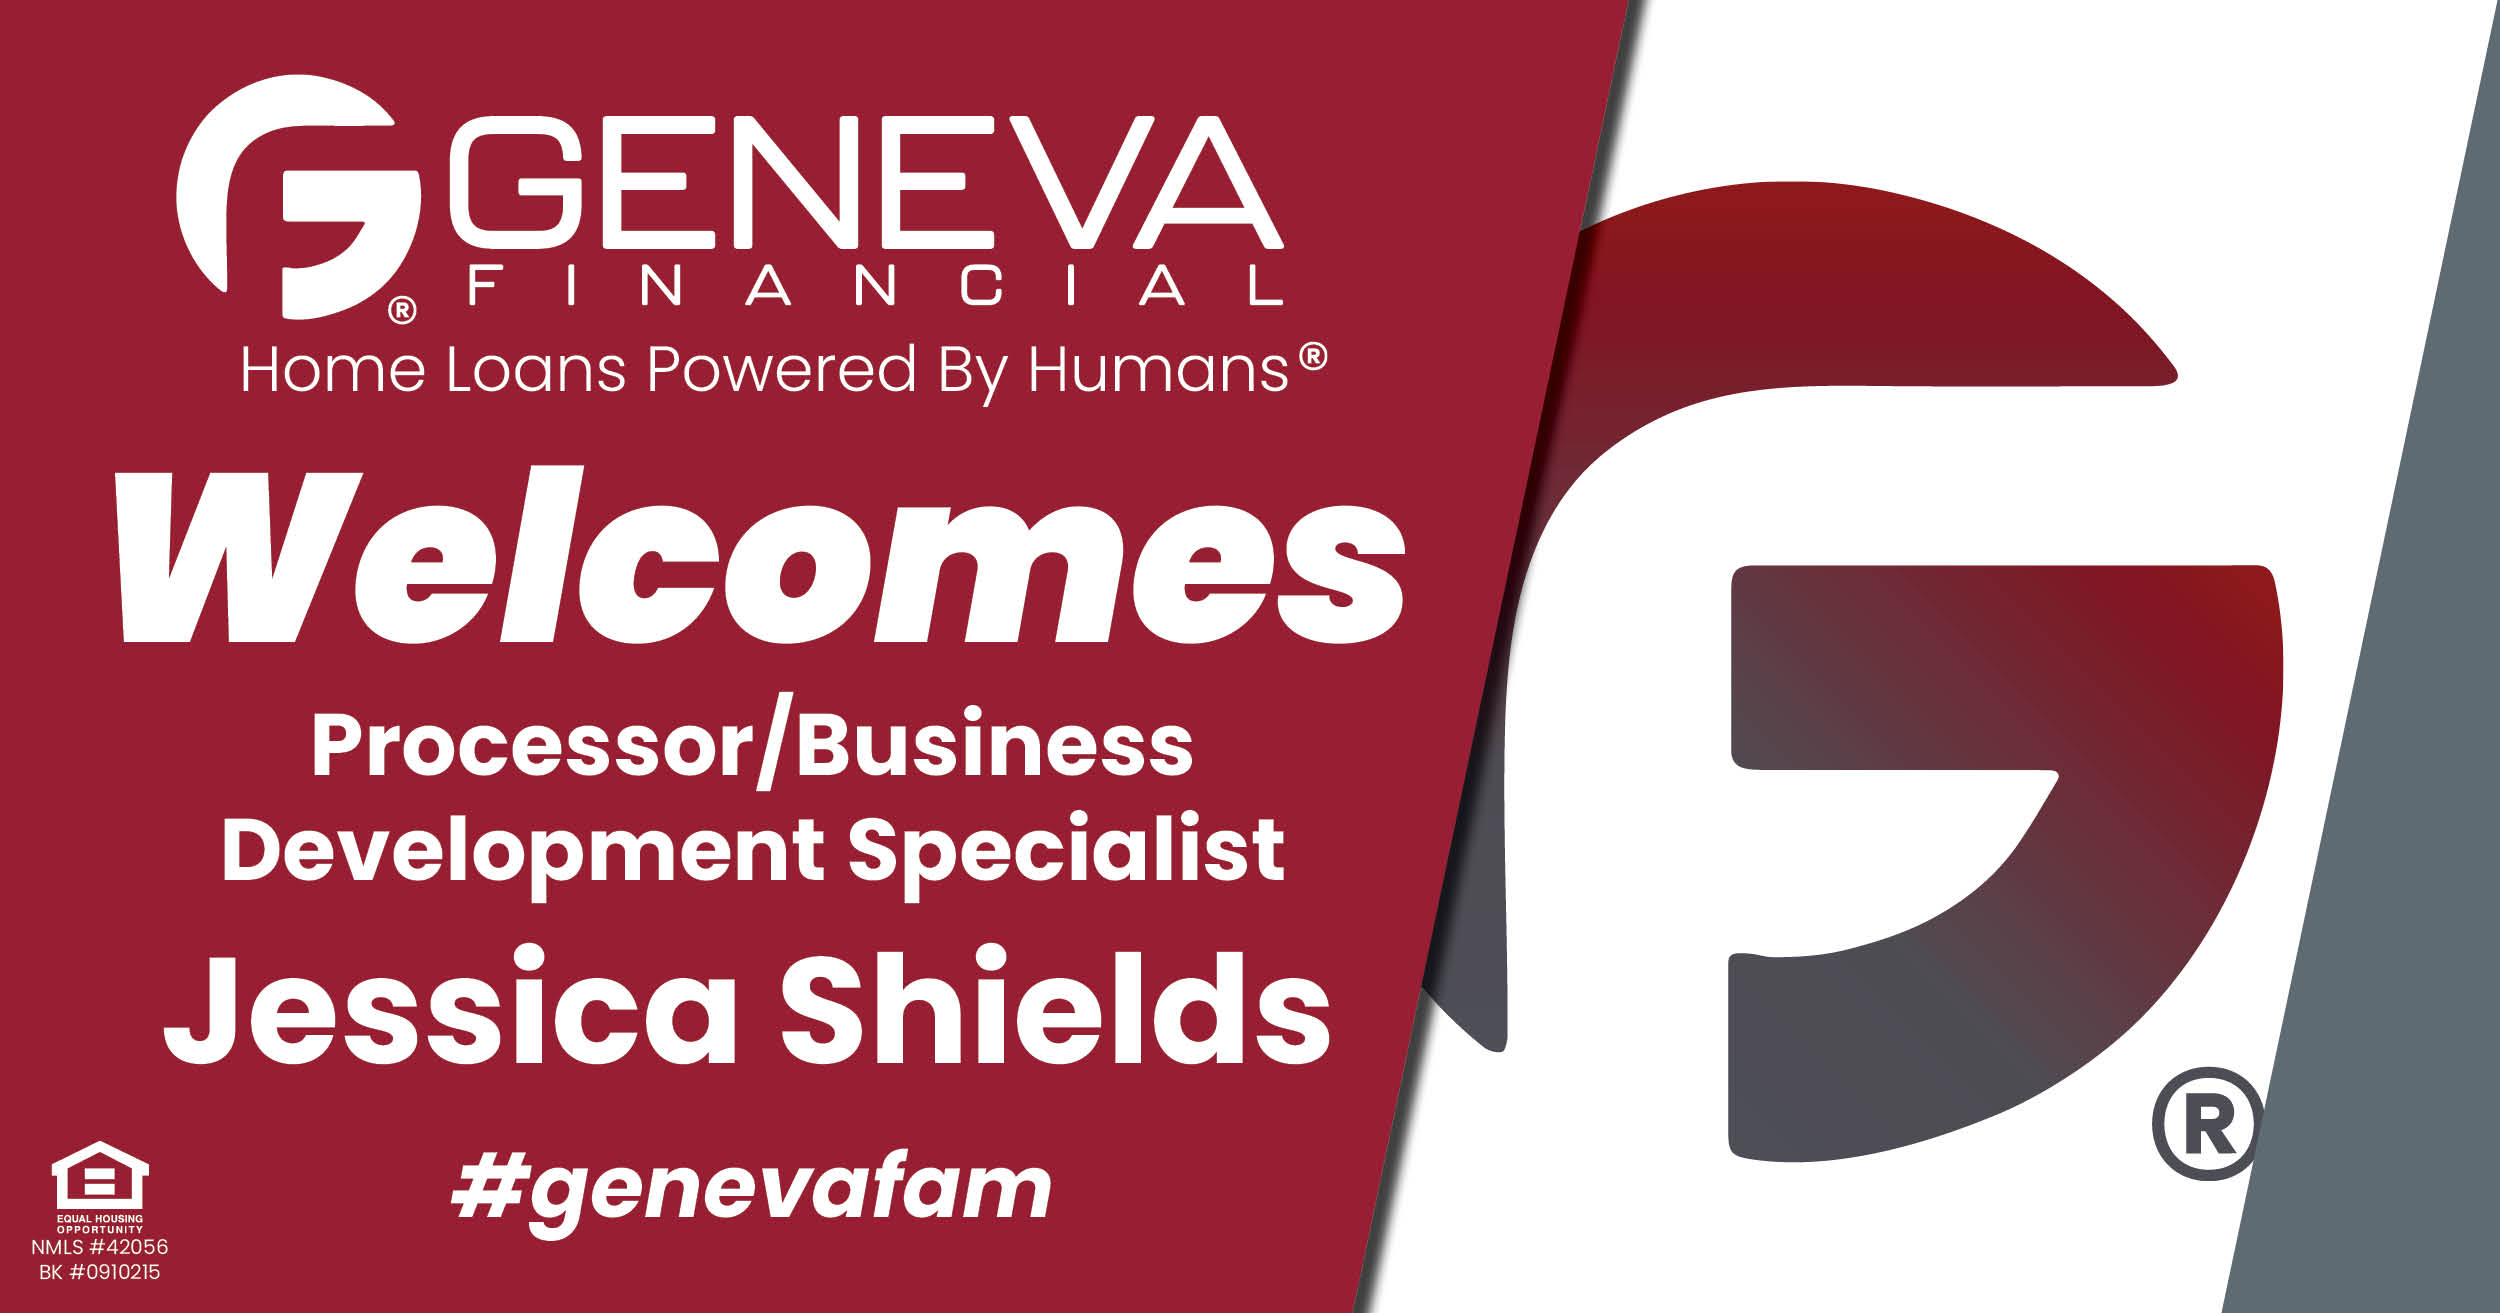 Geneva Financial Welcomes New Processor Jessica Shields to the California Market – Home Loans Powered by Humans®.